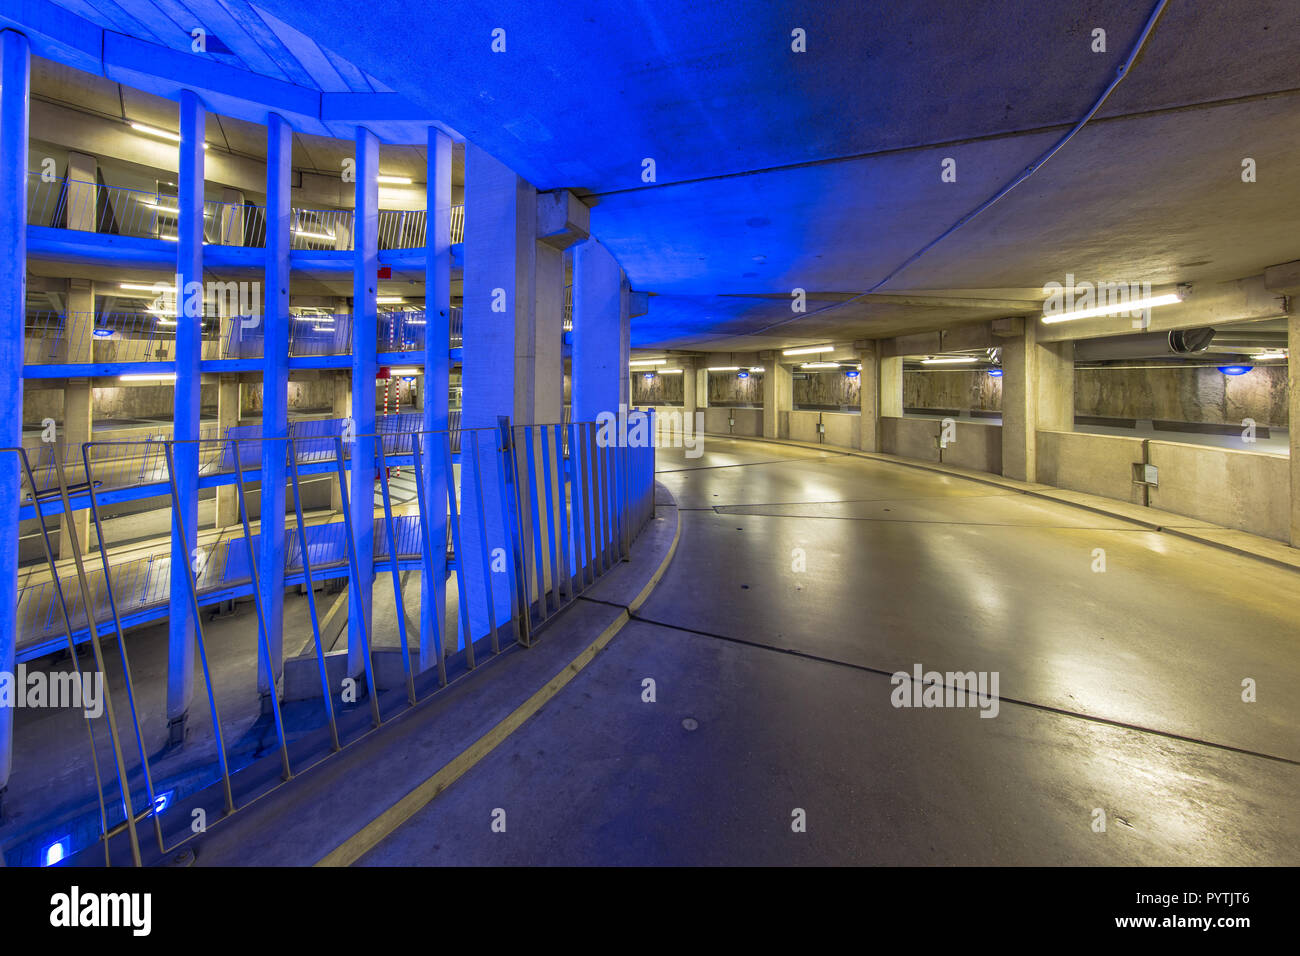 Empty ramp in circular underground parking garage with colorful lighting under an international airport Stock Photo